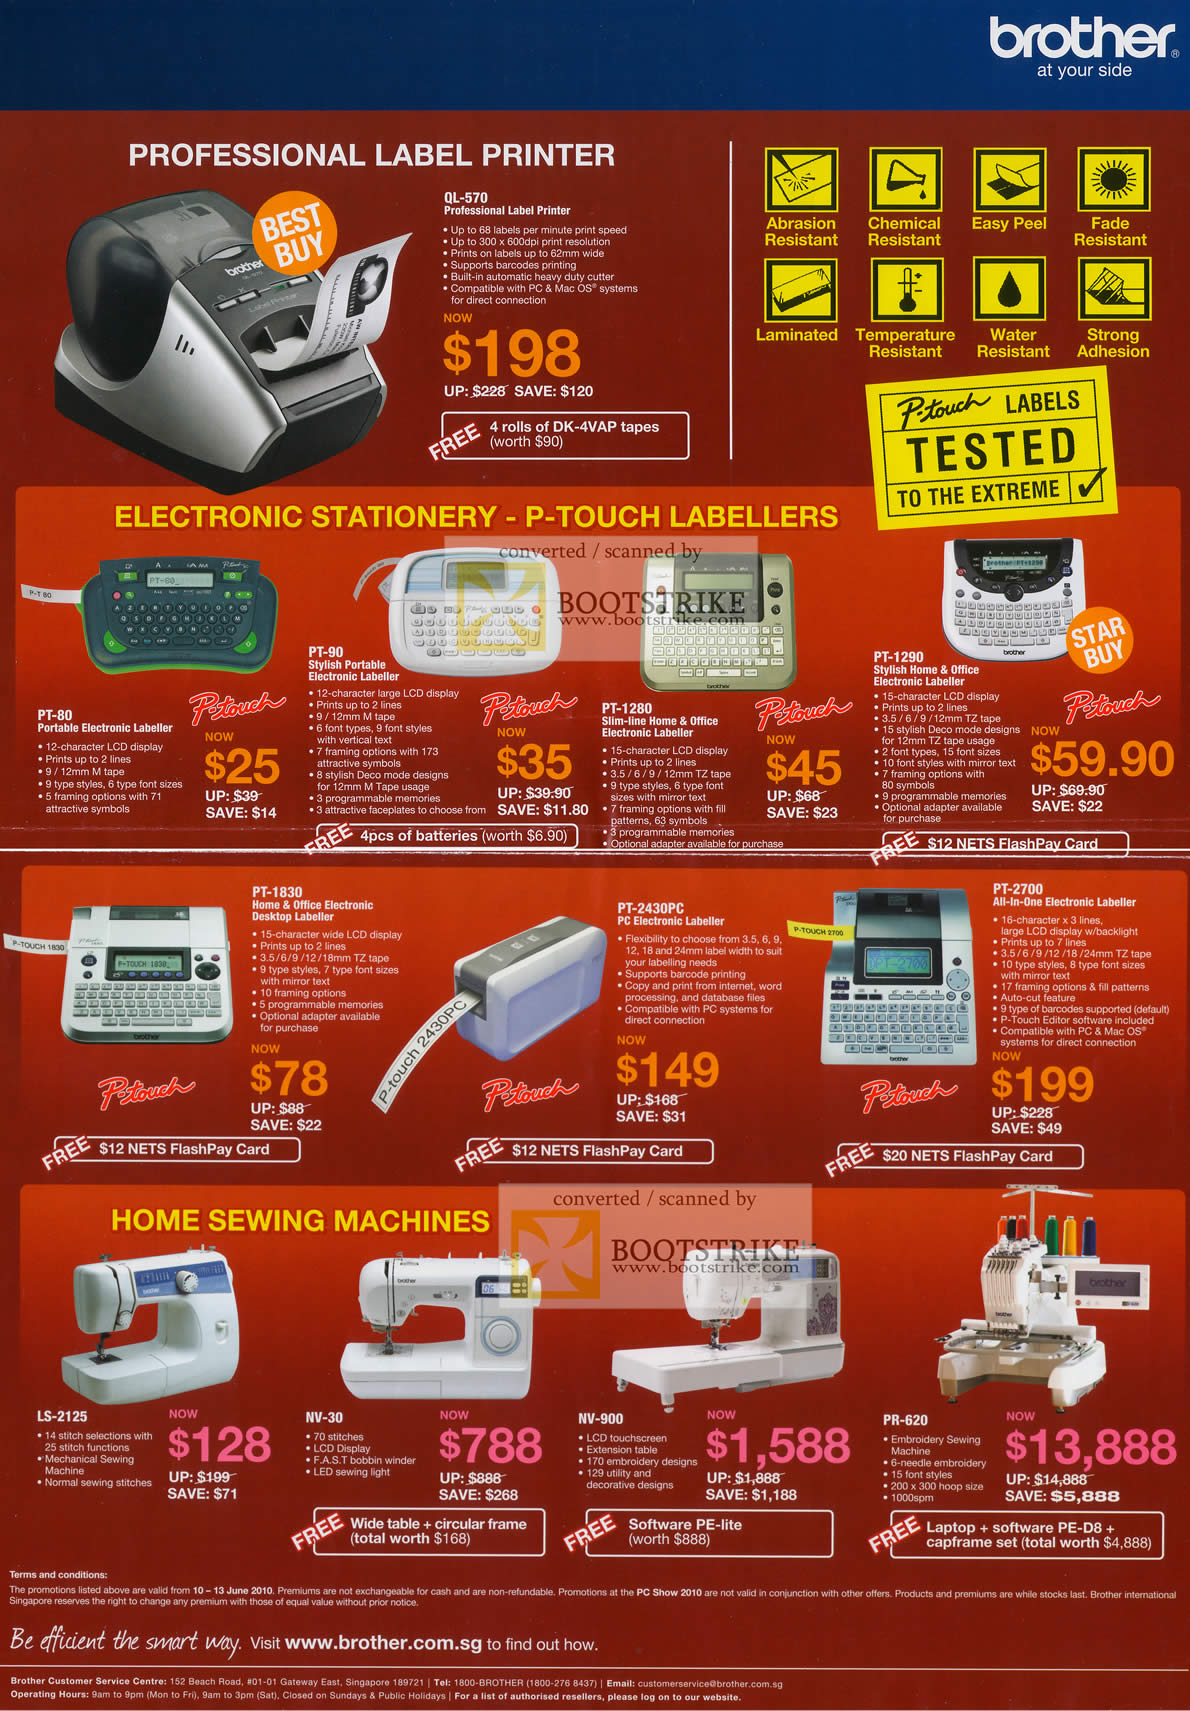 PC Show 2010 price list image brochure of Brother Professional Label Printer QL 570 P Touch Labellers PT 80 90 1280 1290 1830 2430PC 2700 Home Sewing Machines